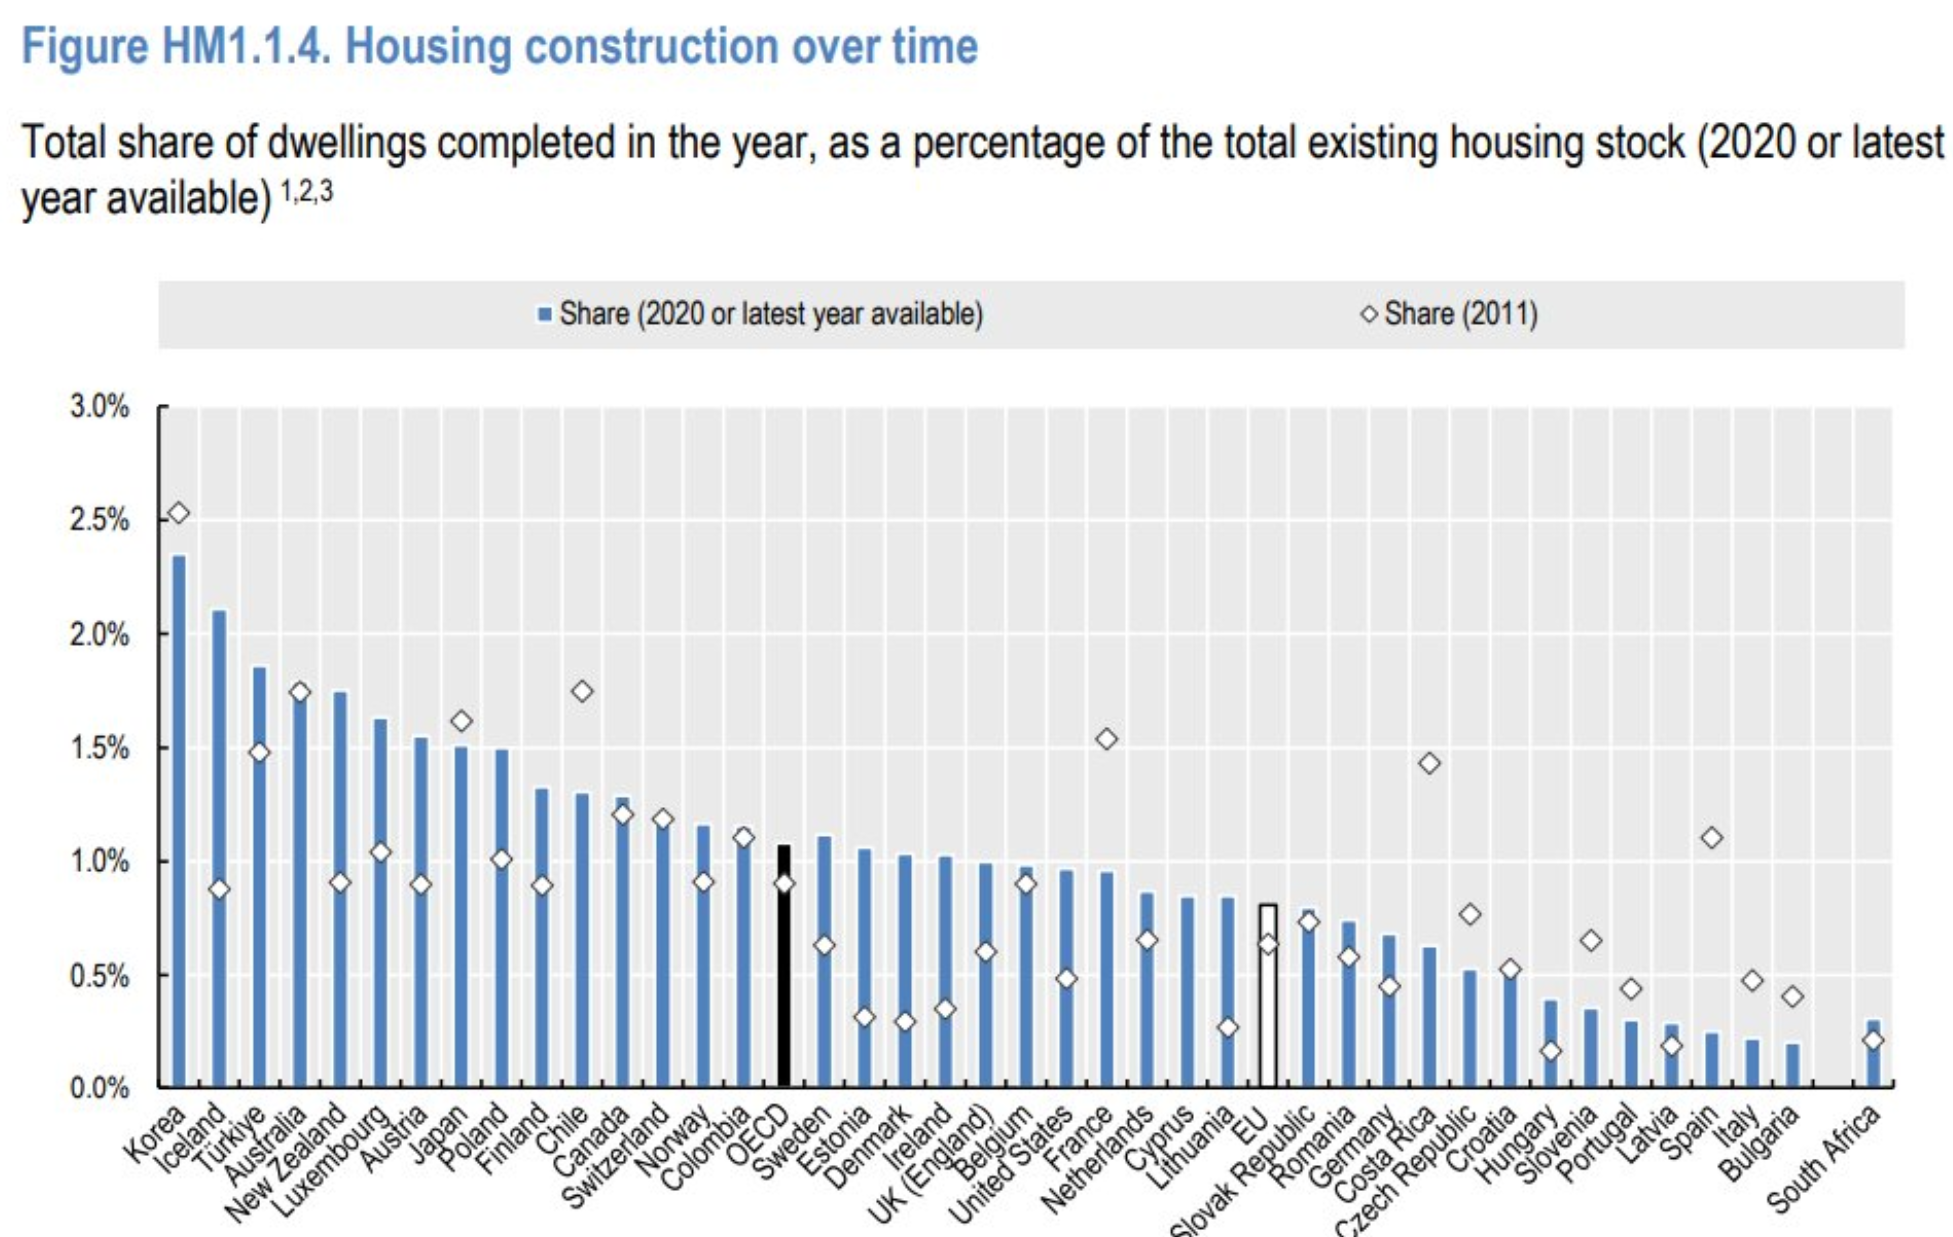 Housing construction over time